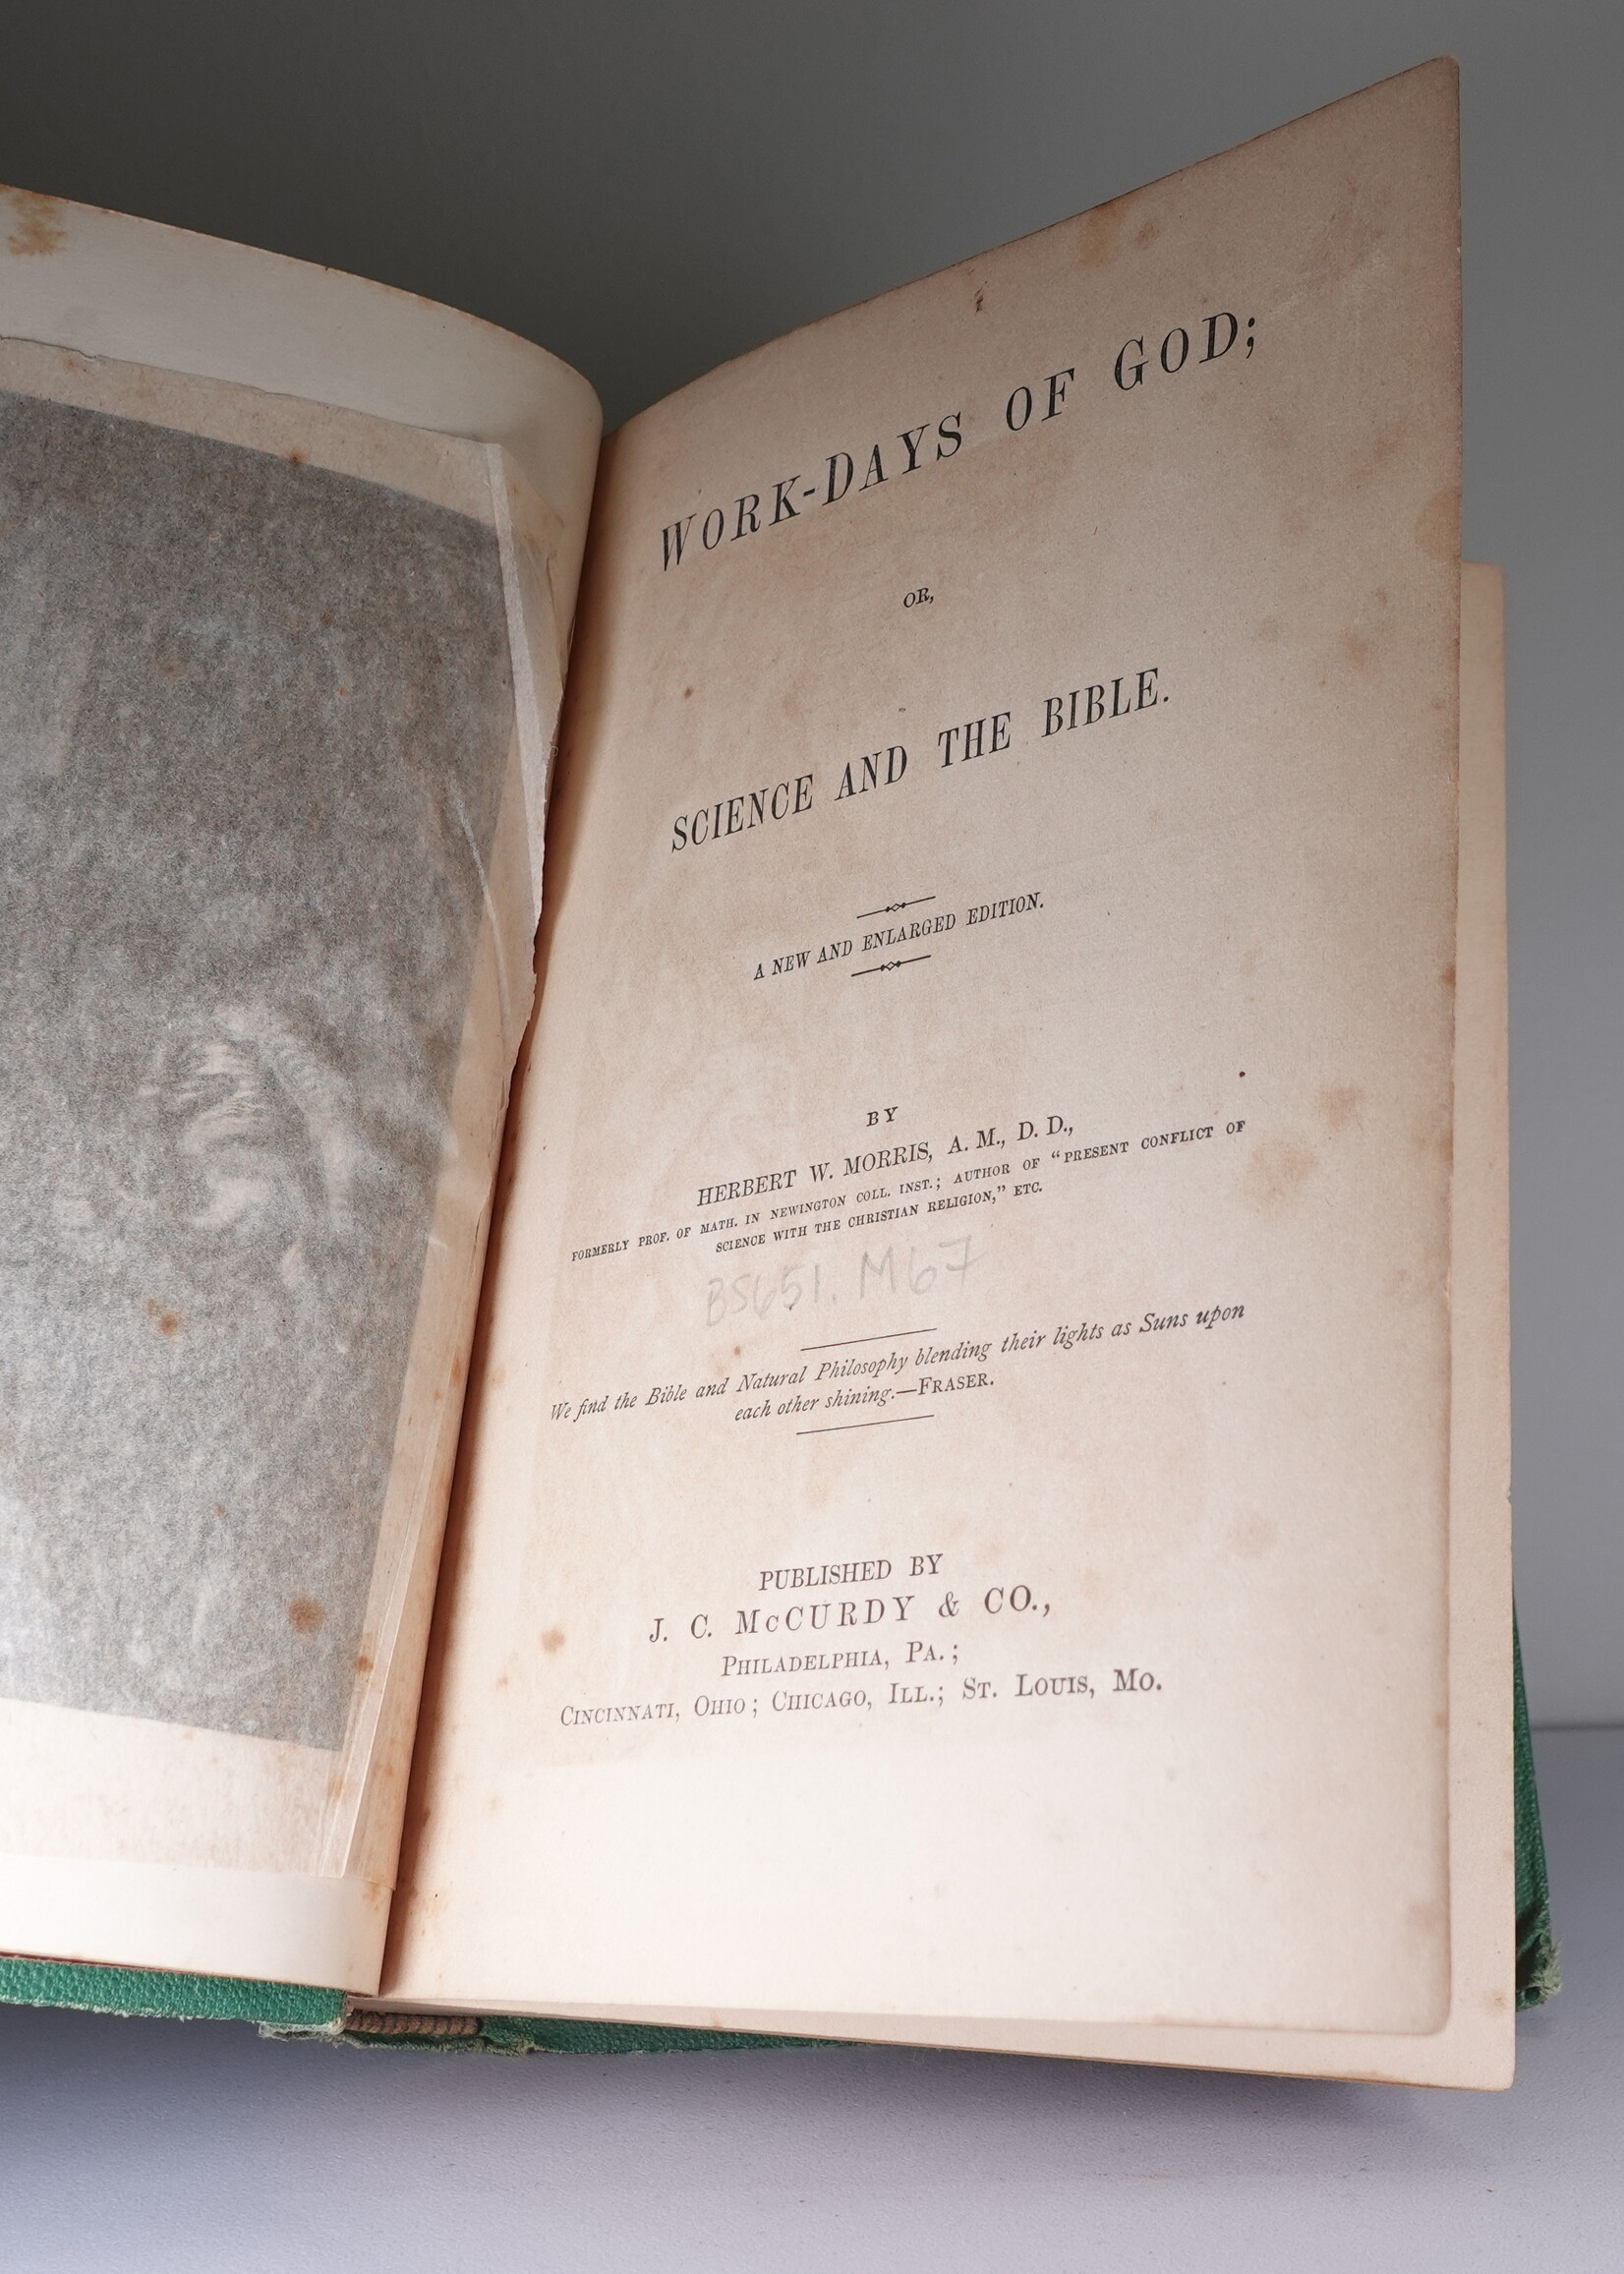 Work Days of God, or Science and the Bible (1st Edition, 1877)